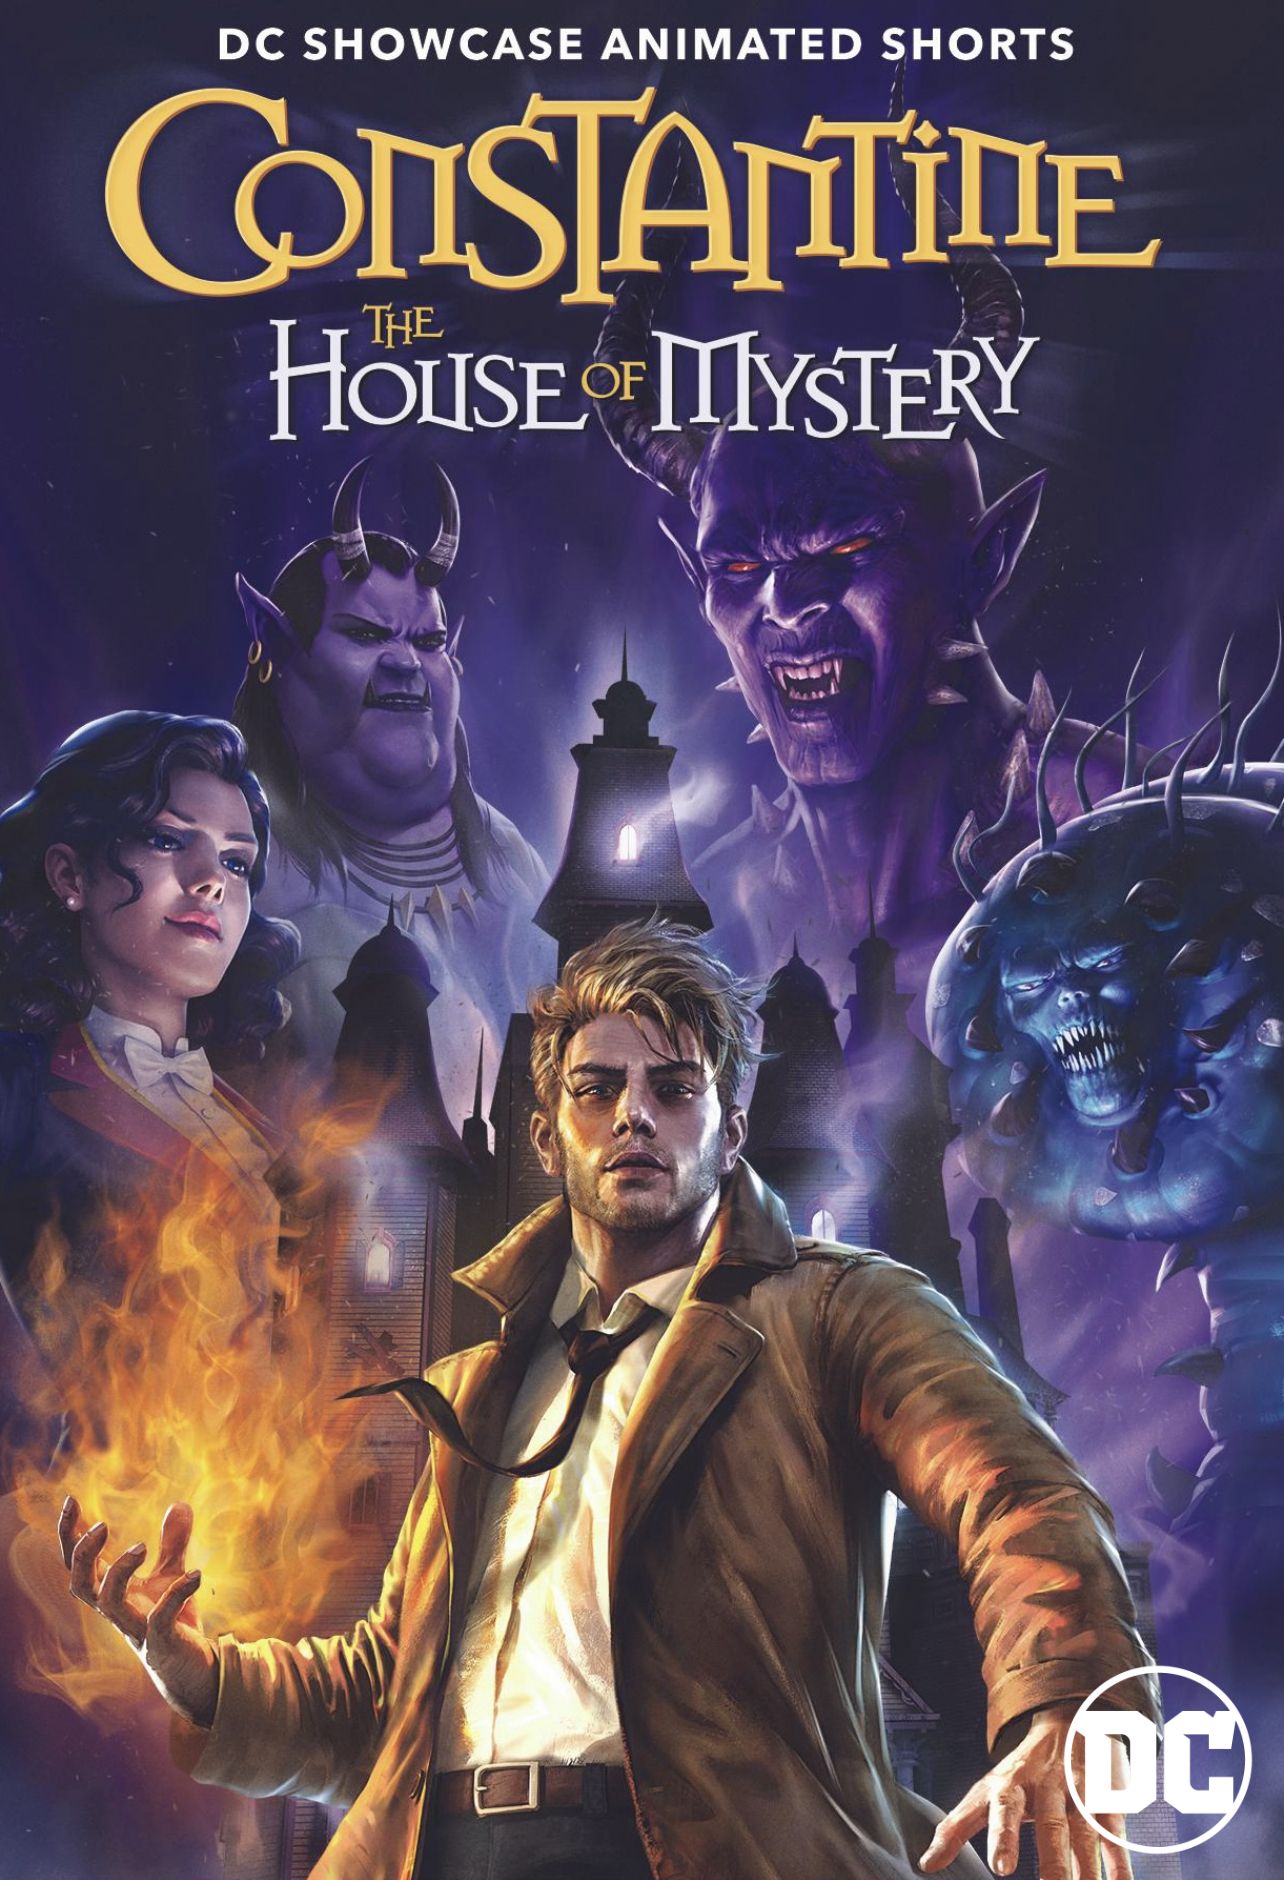 DC Showcase: Constantine - The House of Mystery (2022) BluRay download full movie